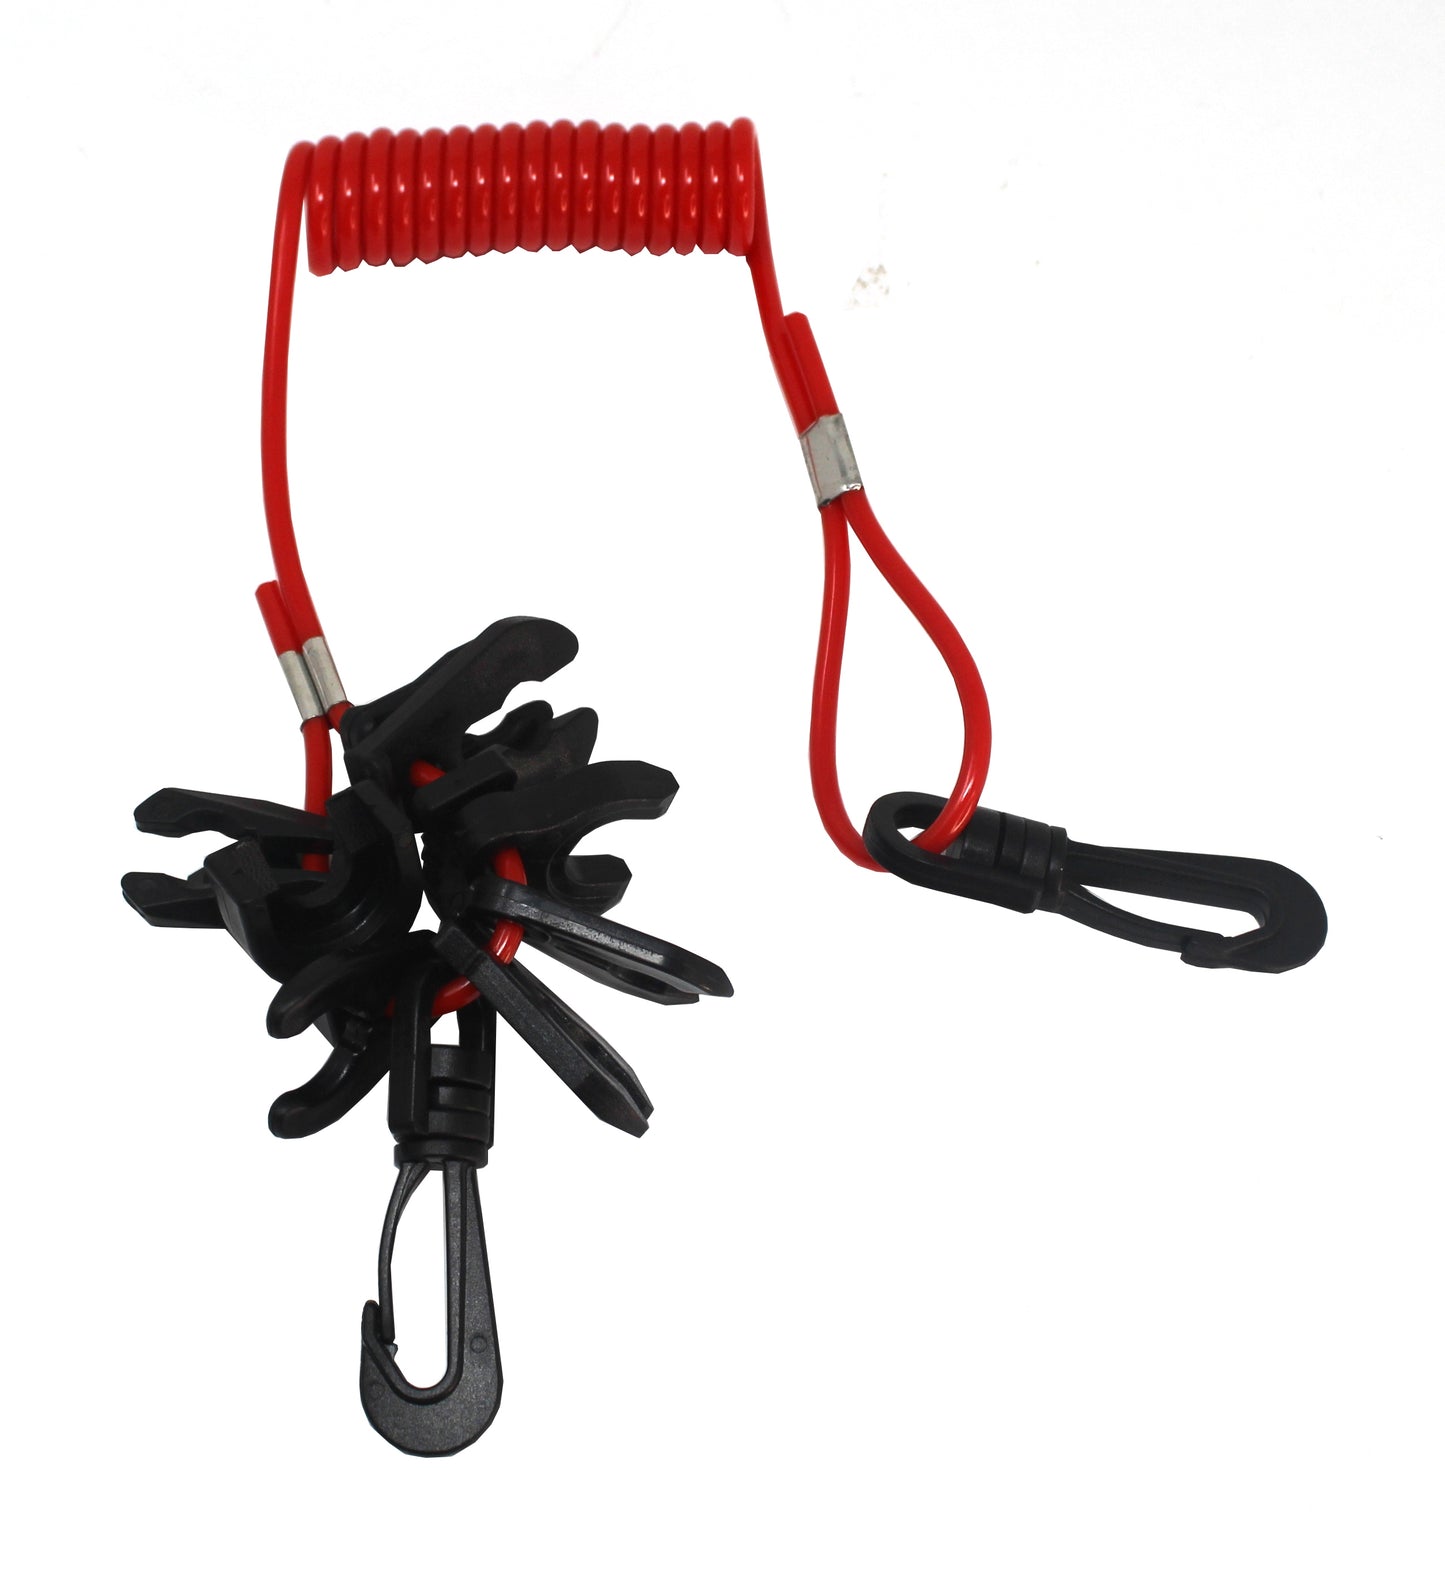 Ultimate Boat Kill Switch Safety Lanyard- Durable & Waterproof with 9 switch keys